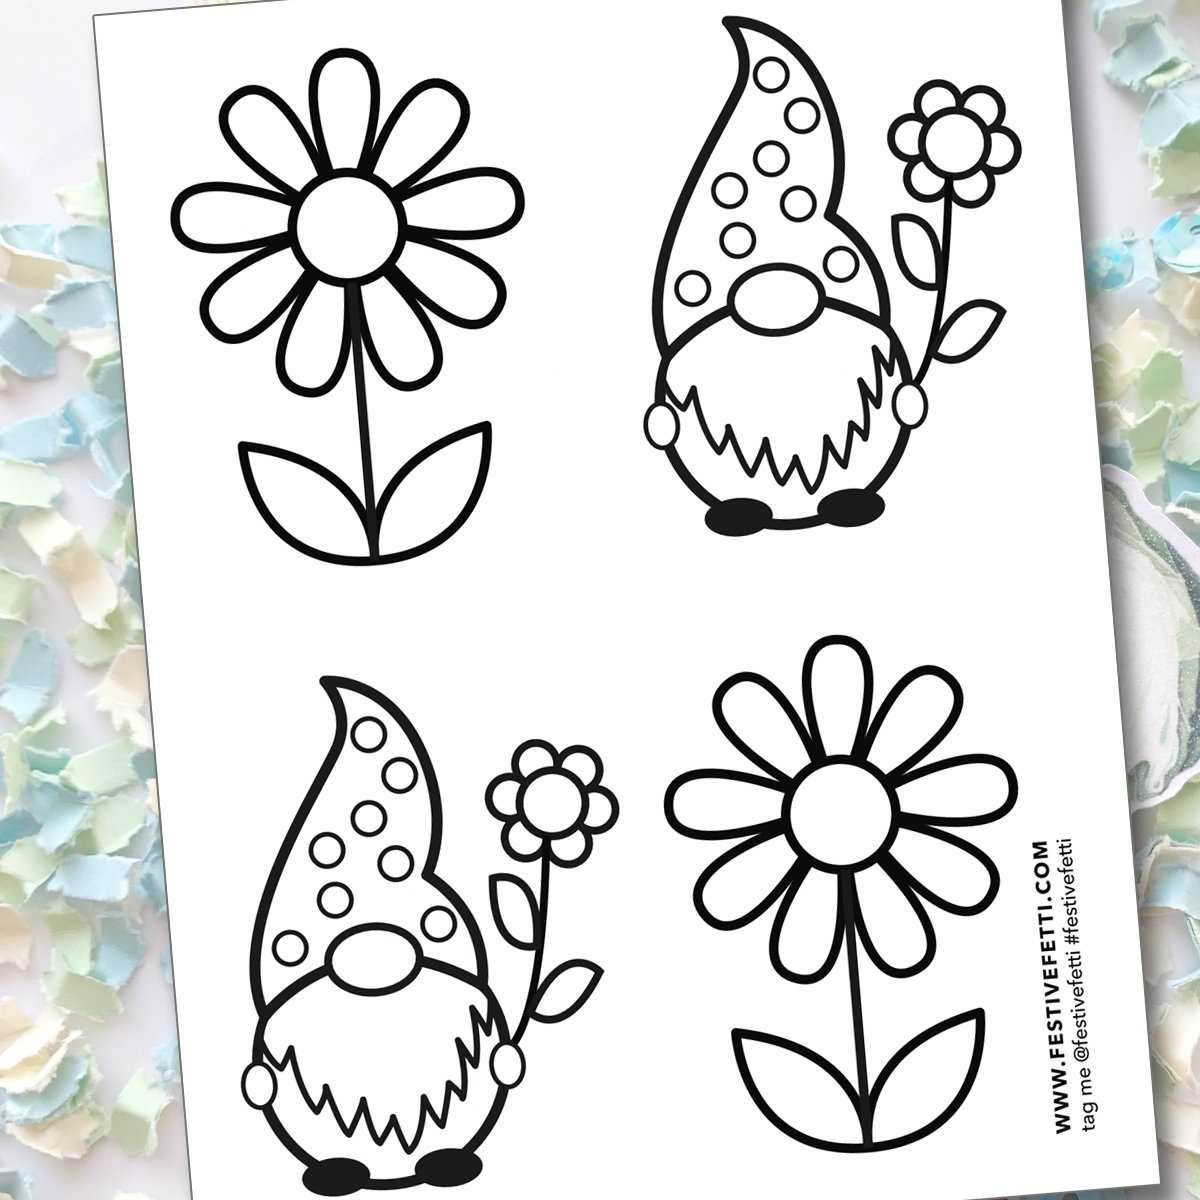 Gnome and daisy coloring page